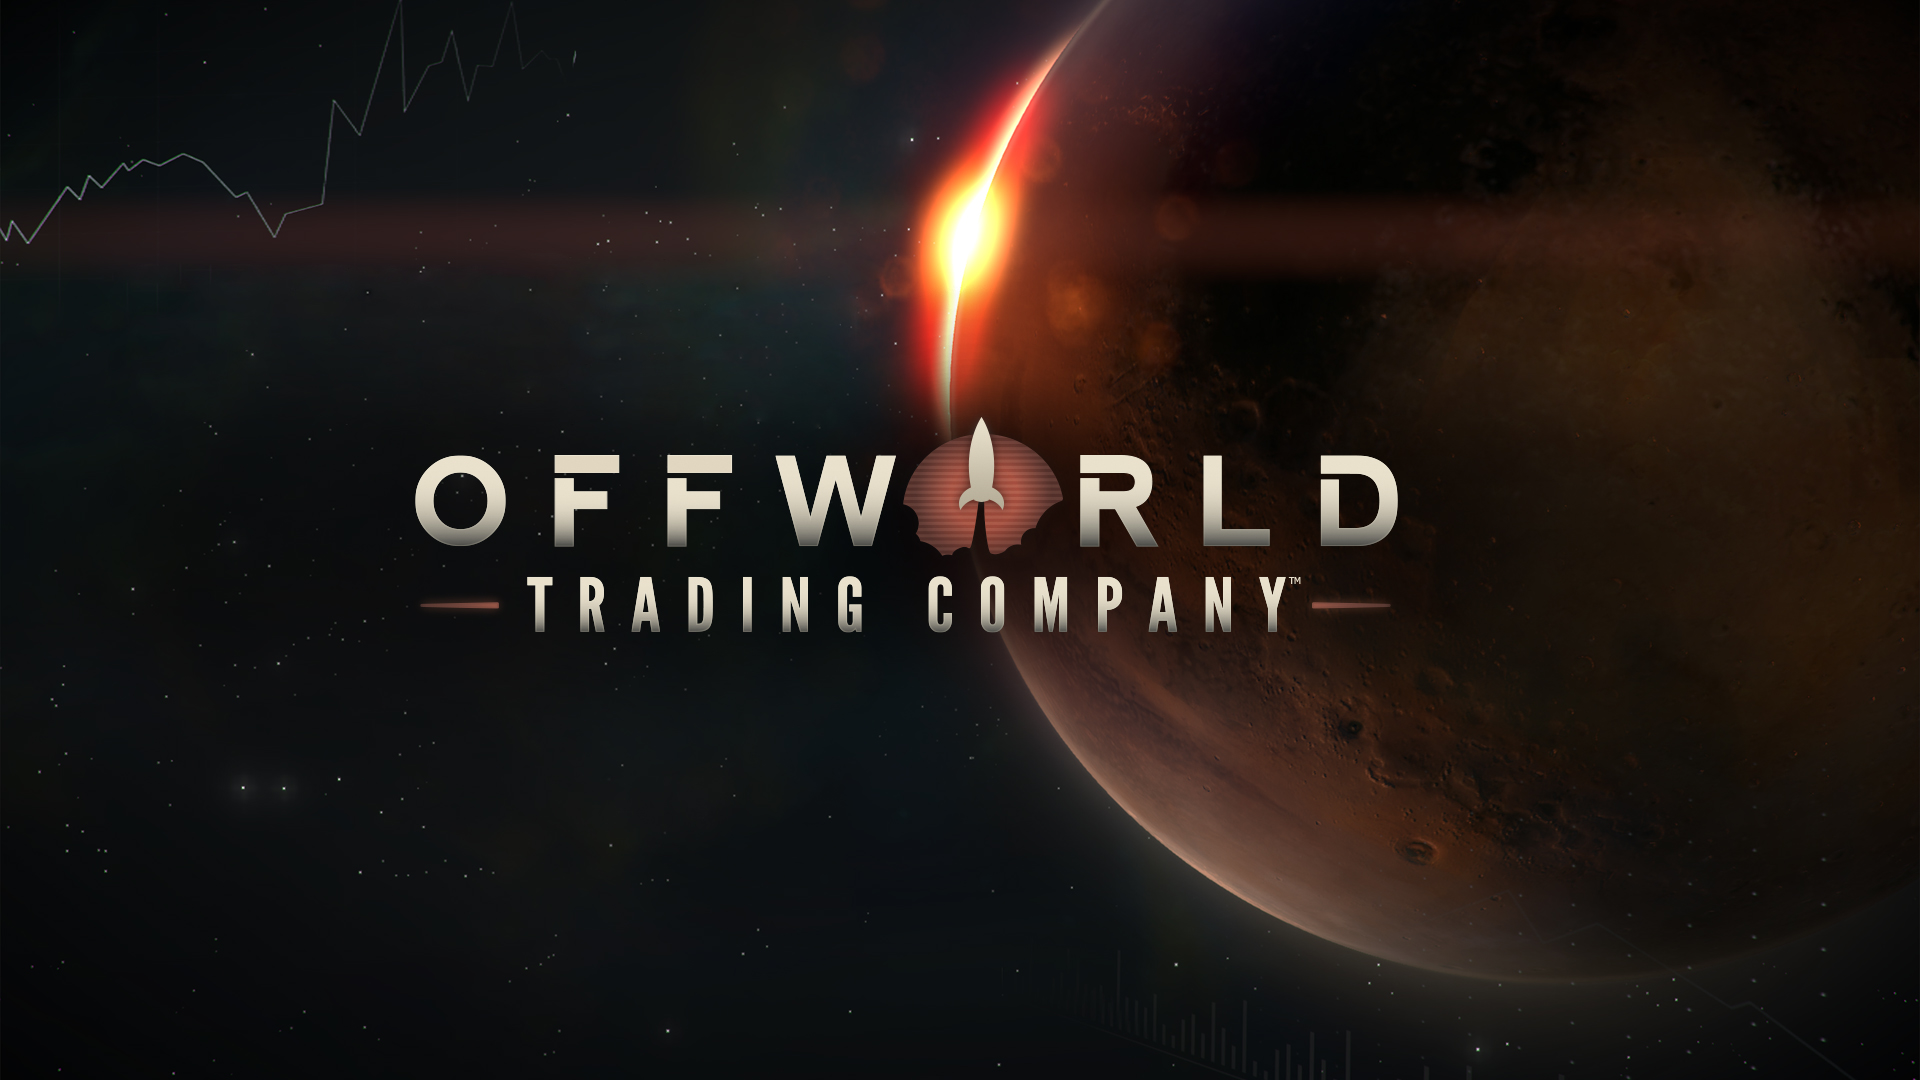 Offworld Offworld Trading Company Stardock Mohawk Games Real Time Strategy Loading Screen Video Game 1920x1080